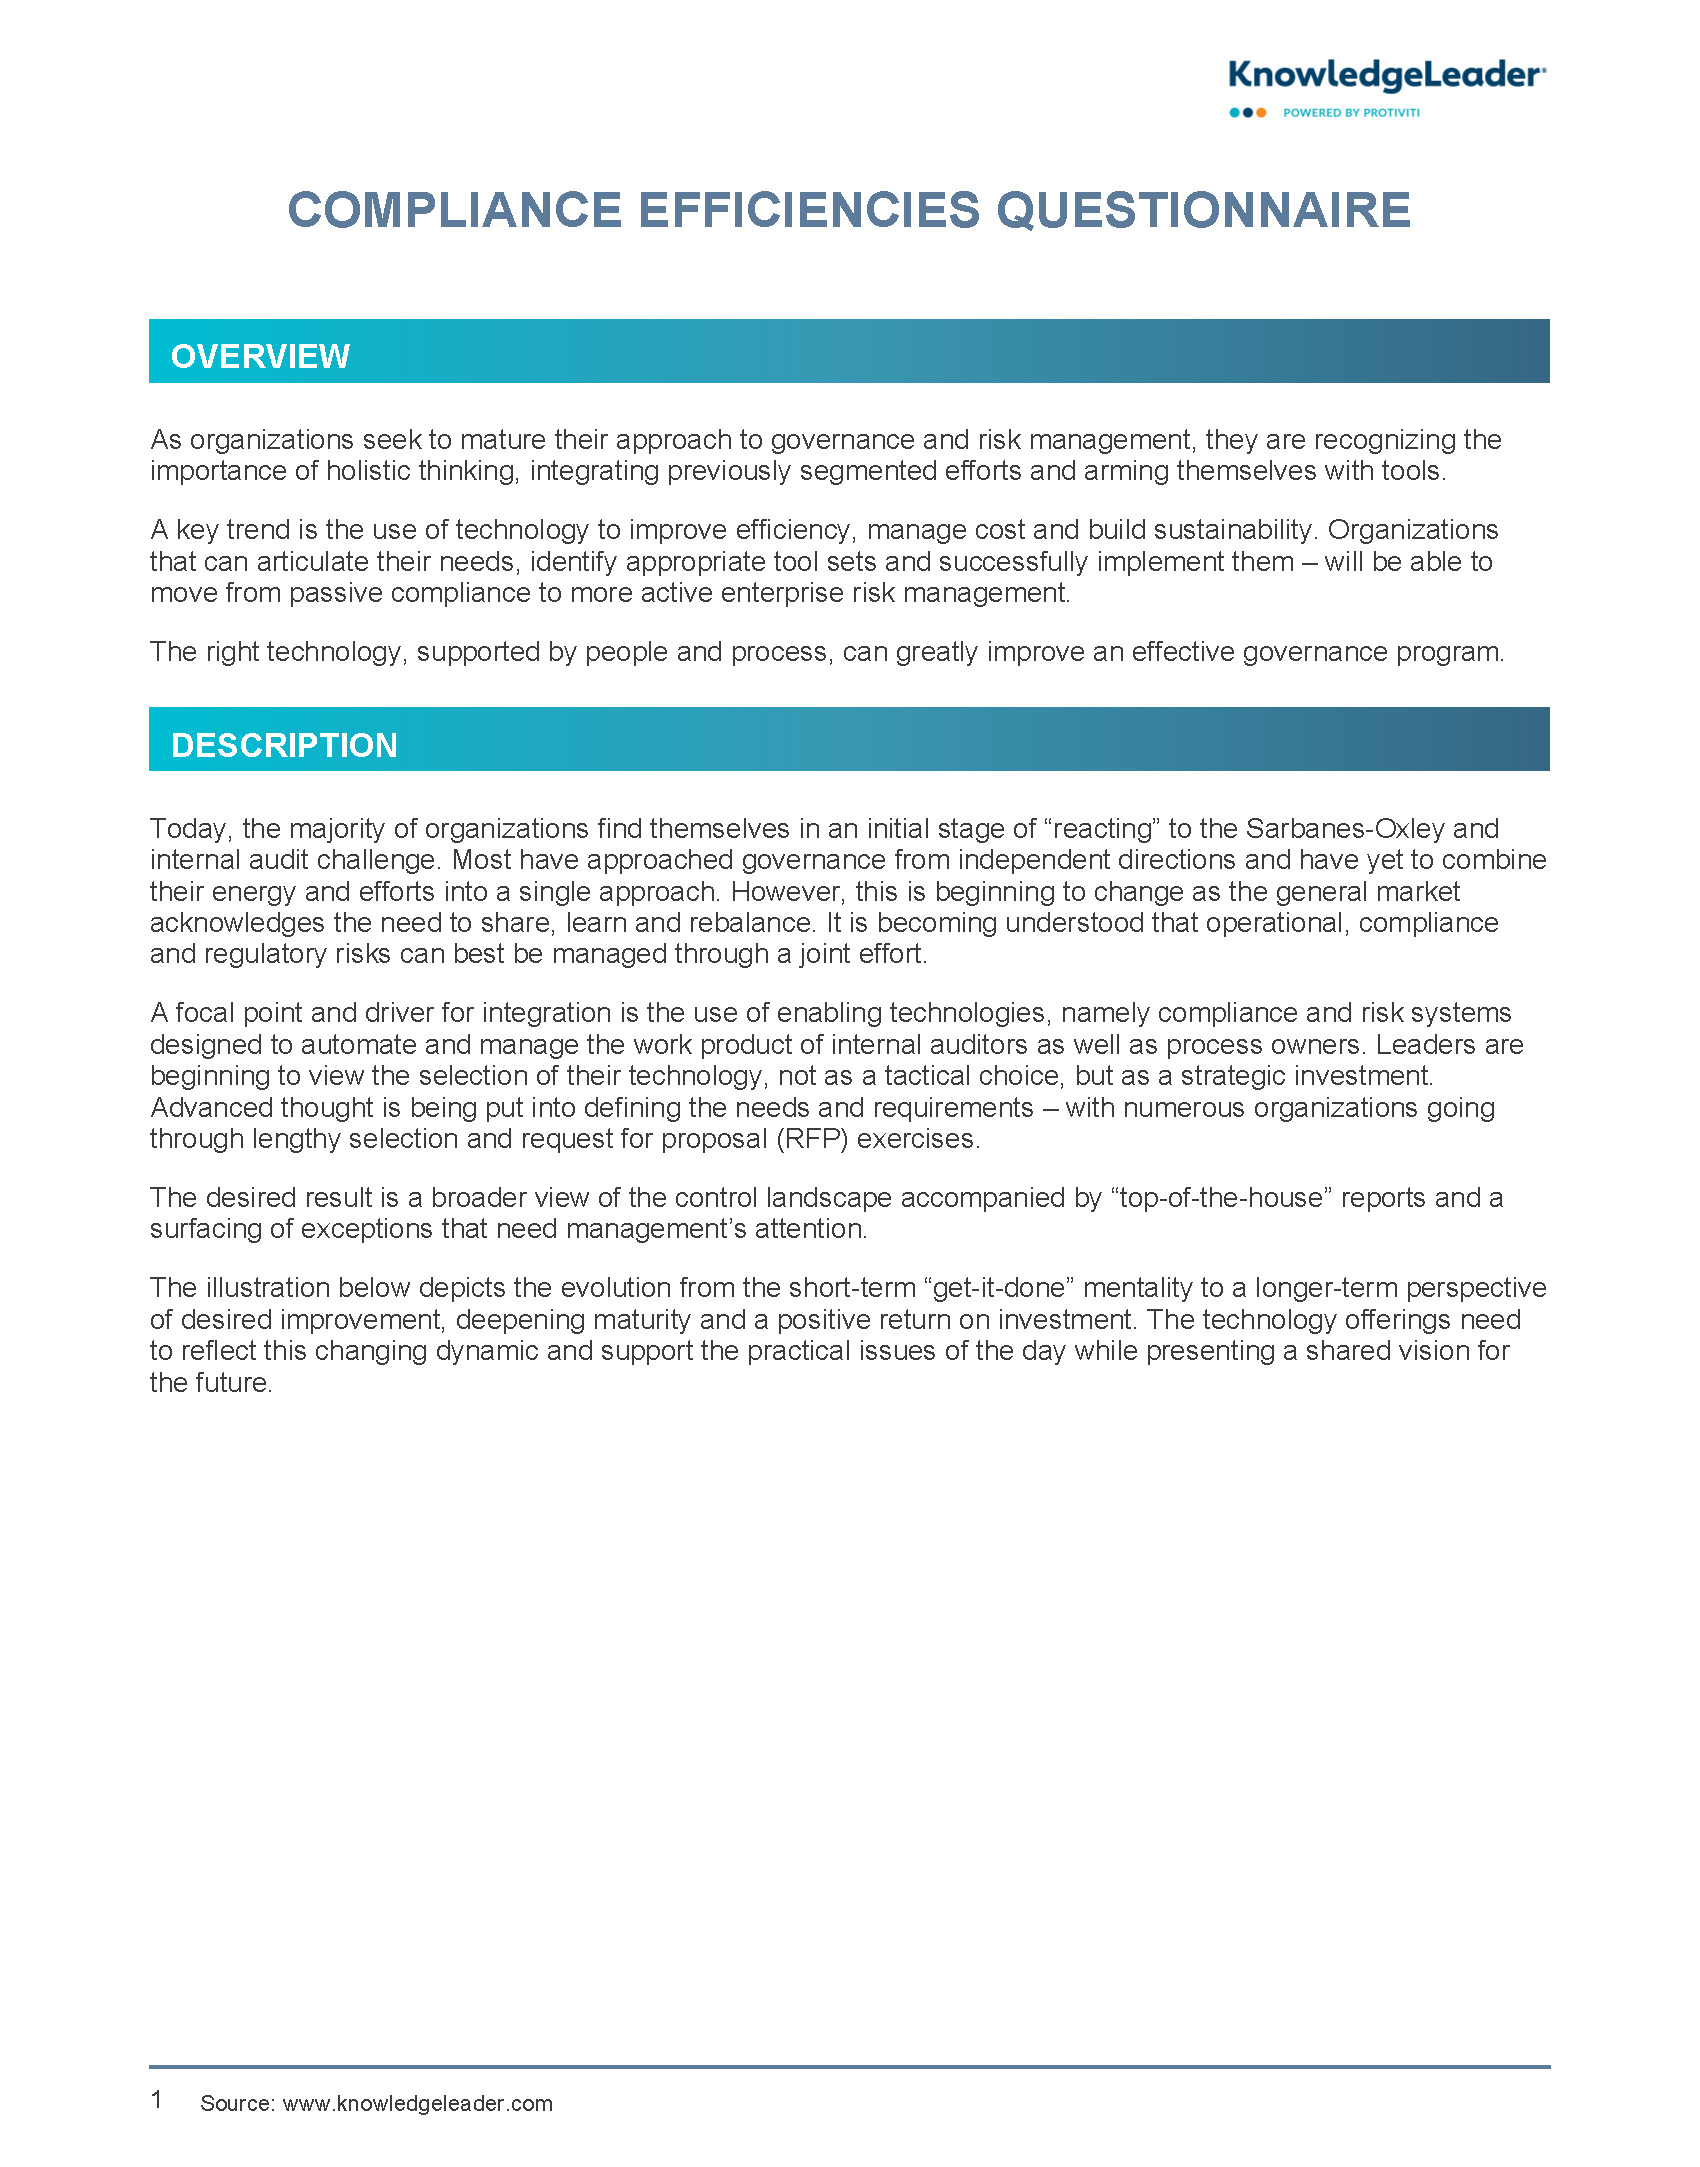 screenshot of first page of Compliance Efficiencies Questionnaire